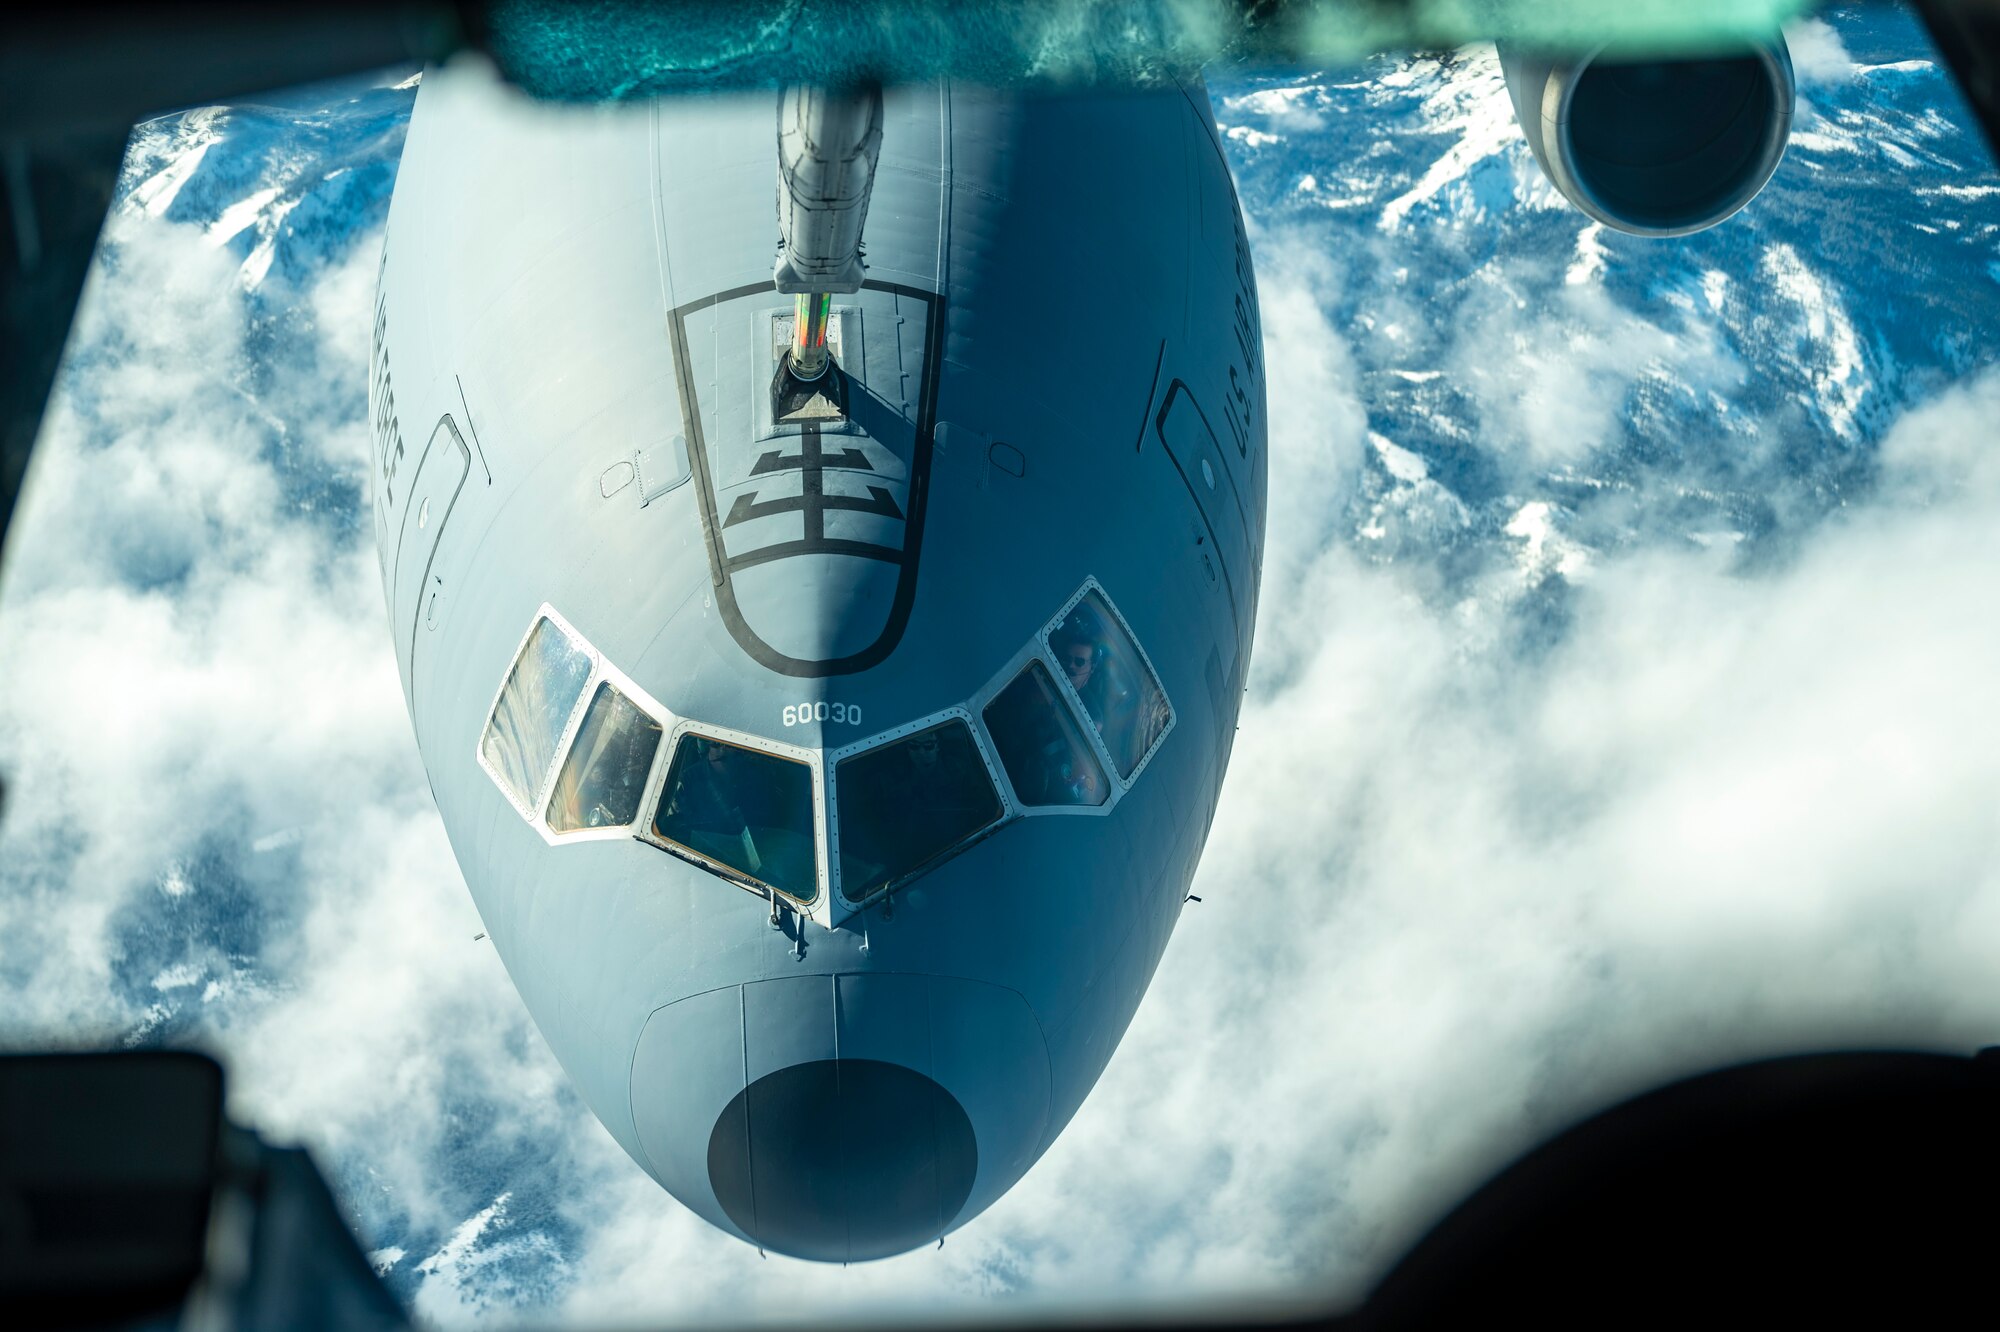 A plane gets refueled in the sky